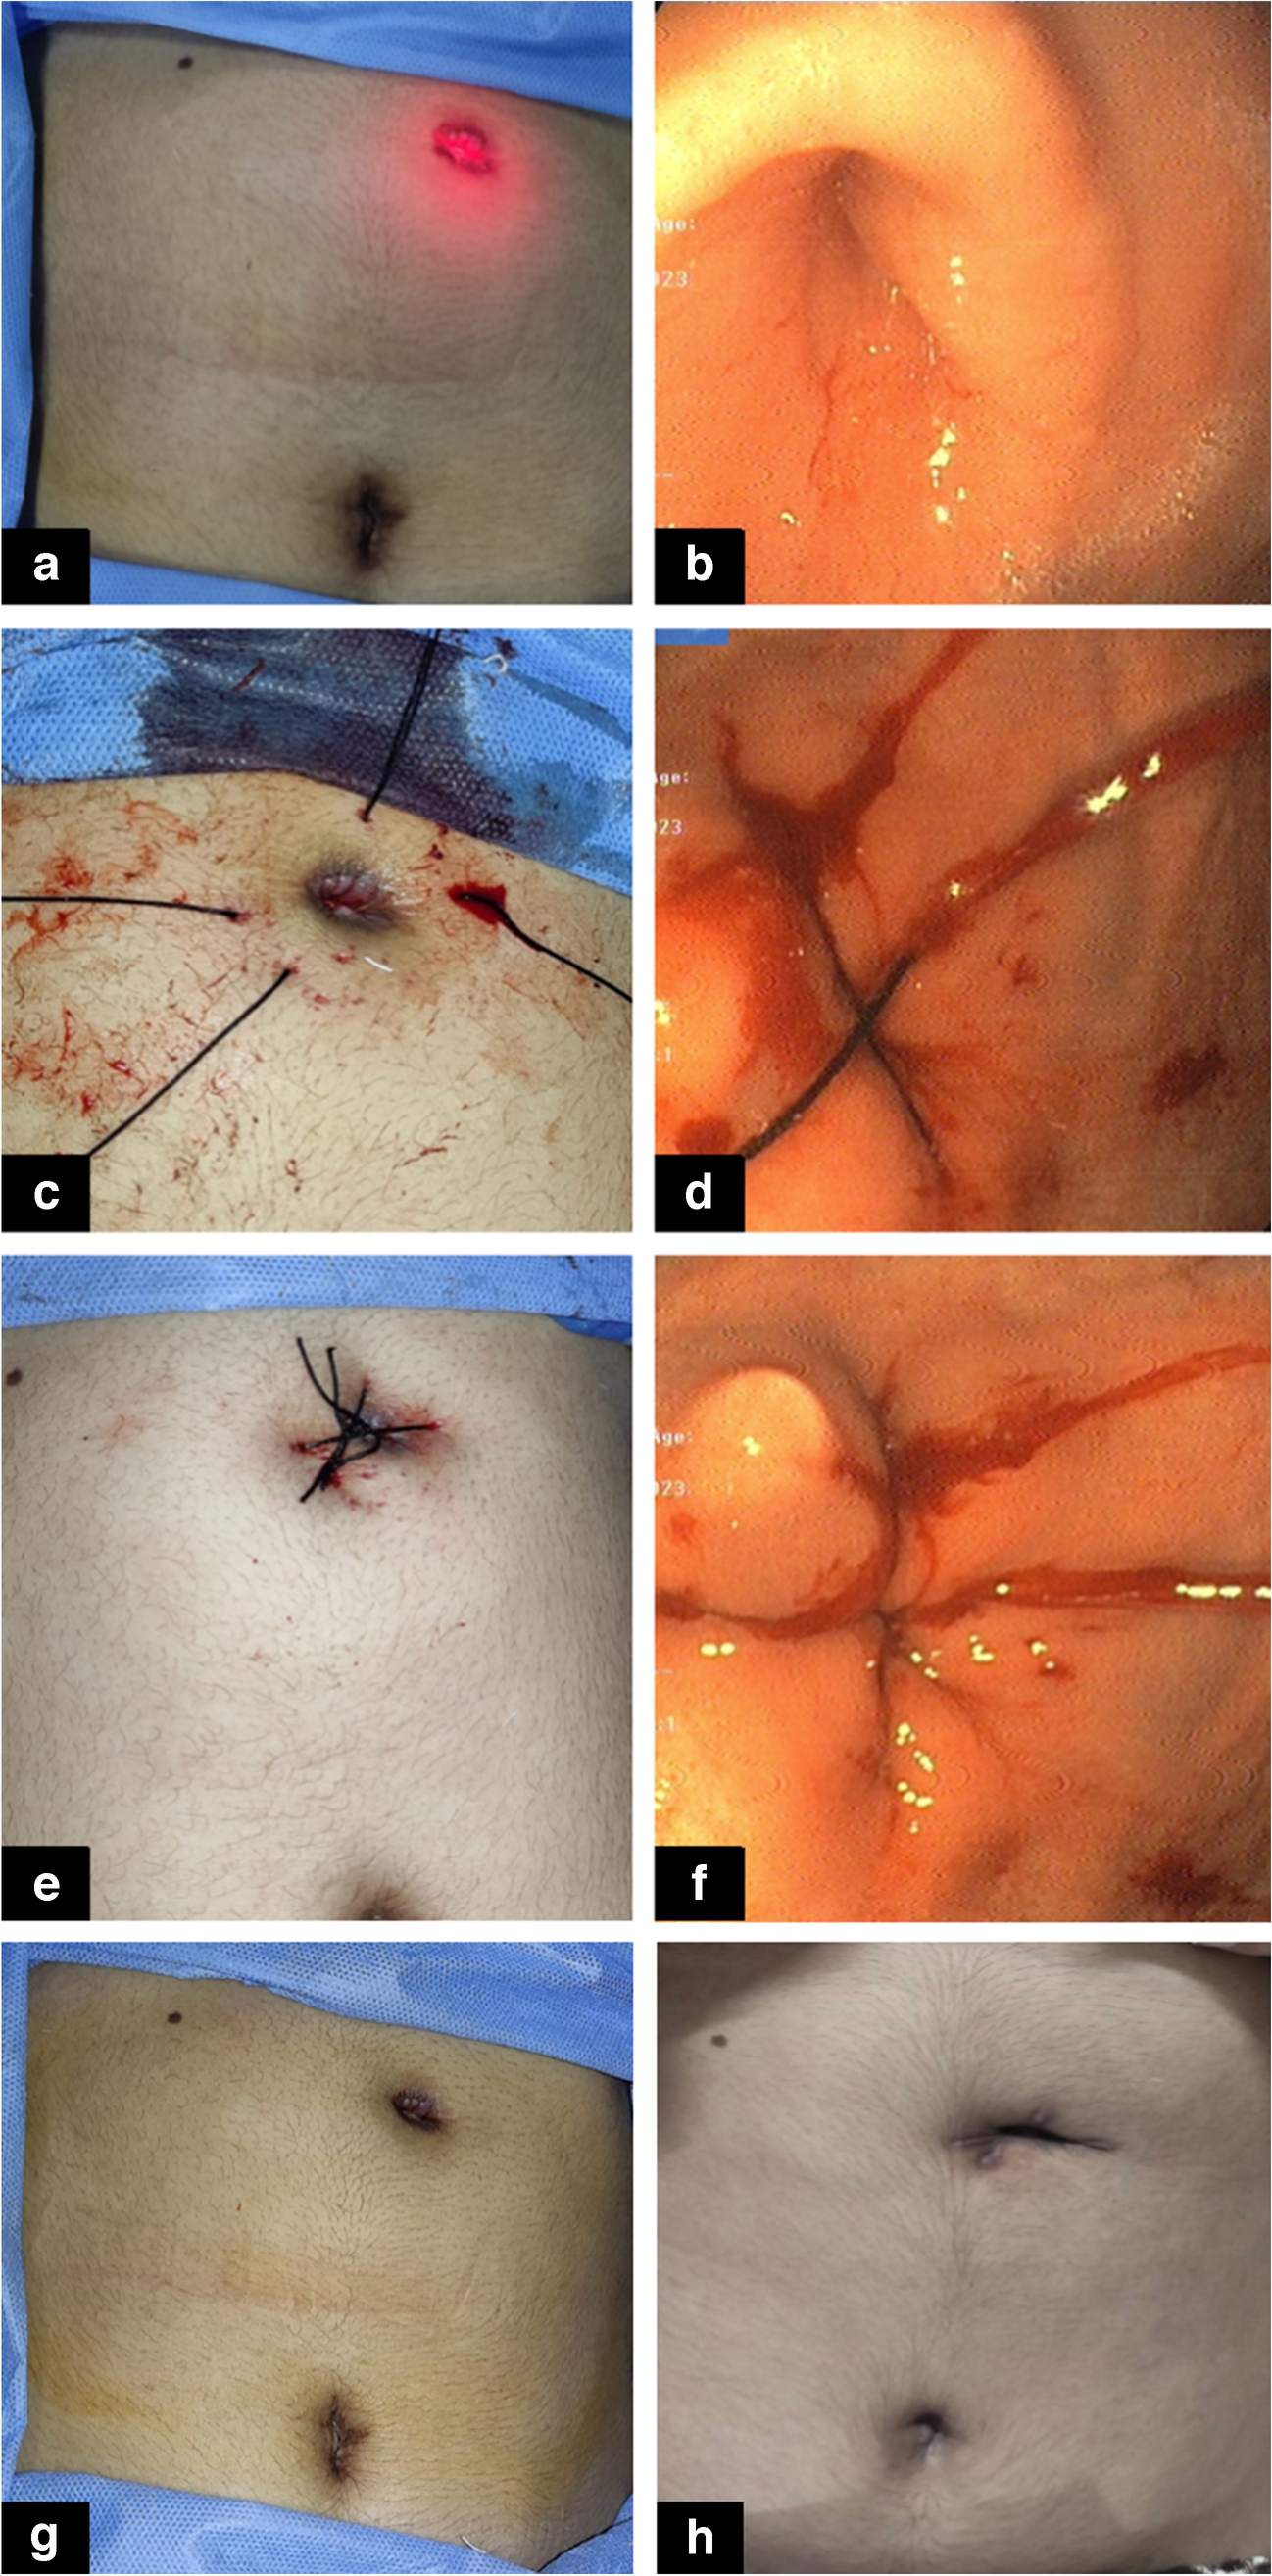 Gastroscopy-guided percutaneous suturing for closure of persistent gastrocutaneous fistula: A novel and cost-effective method